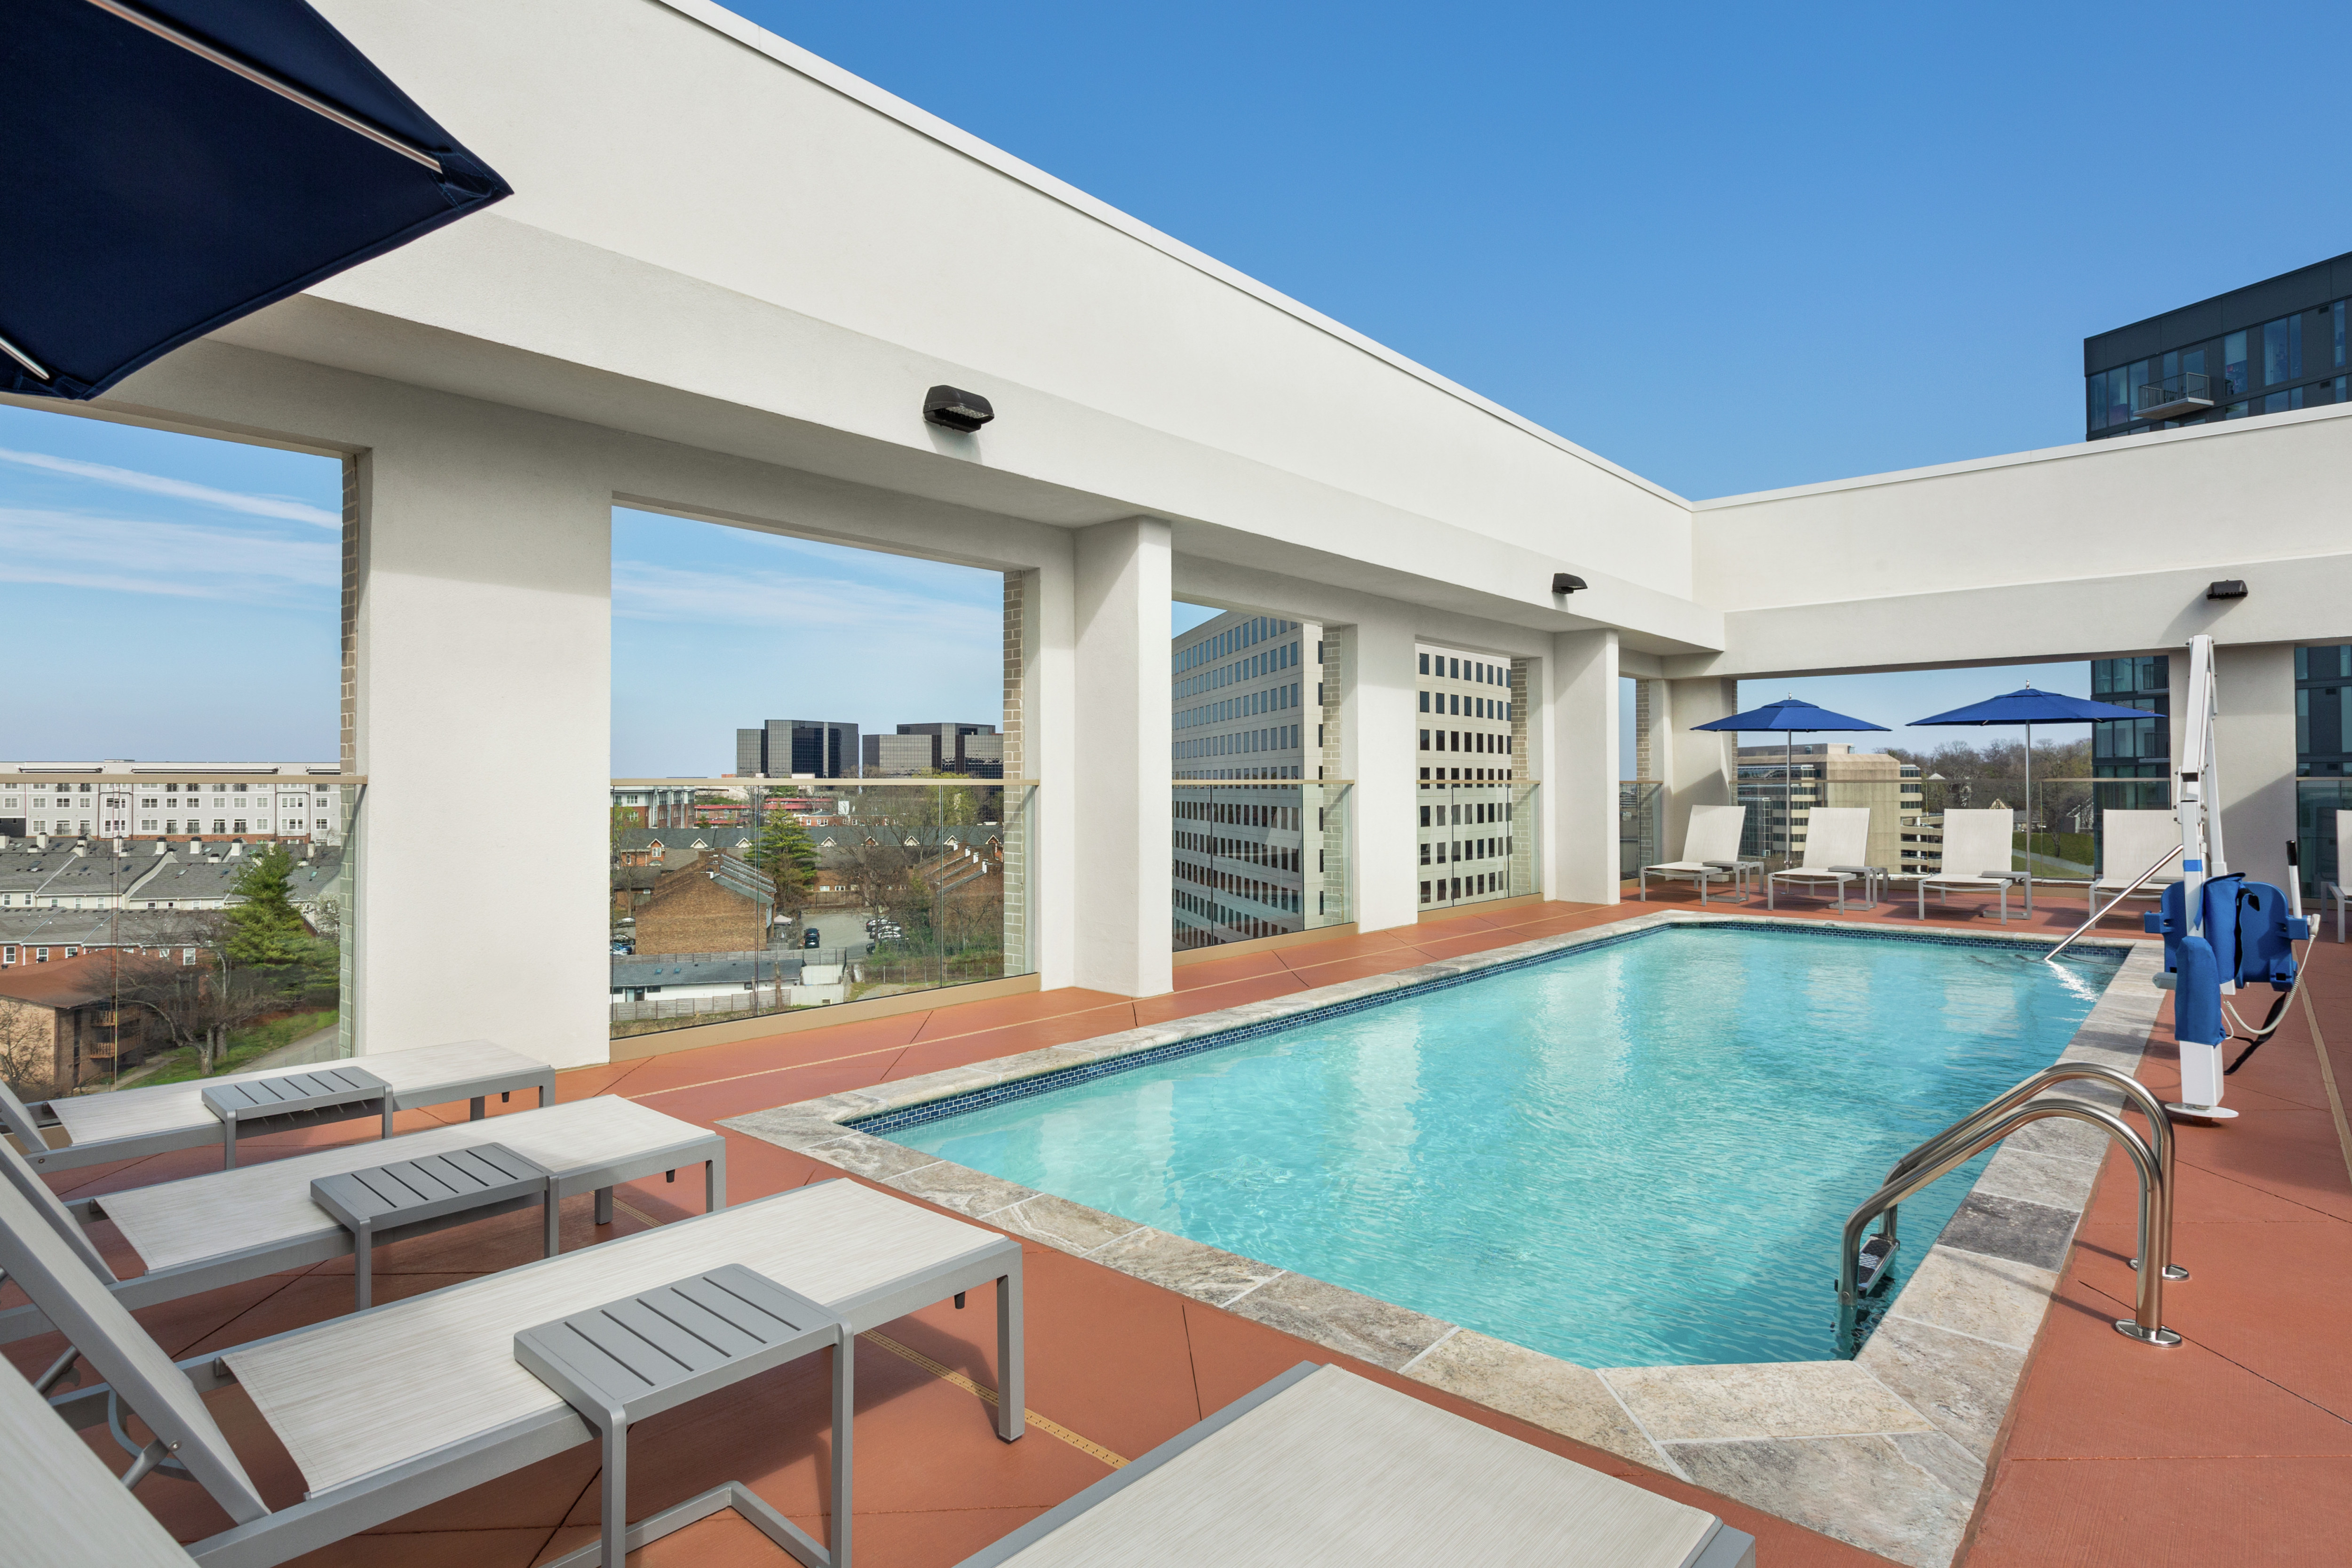 Beautiful outdoor rooftop pool with ample seating and ADA Chair Lift.